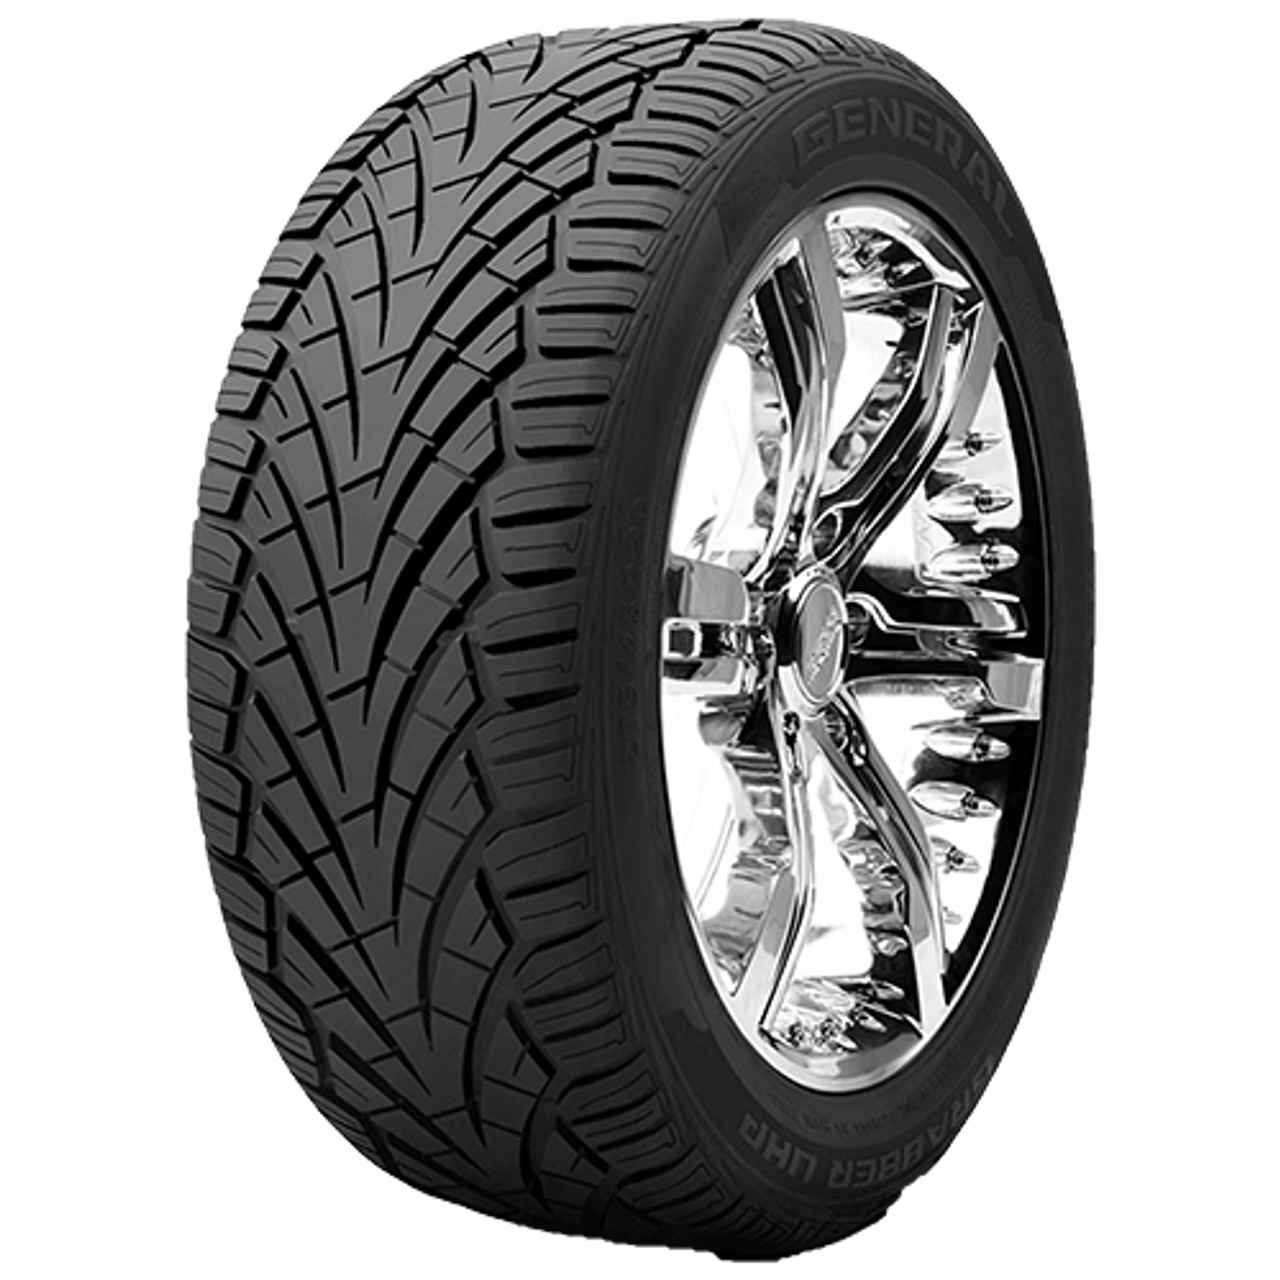 GENERAL TIRE GRABBER UHP 265/70R15 112H BSW